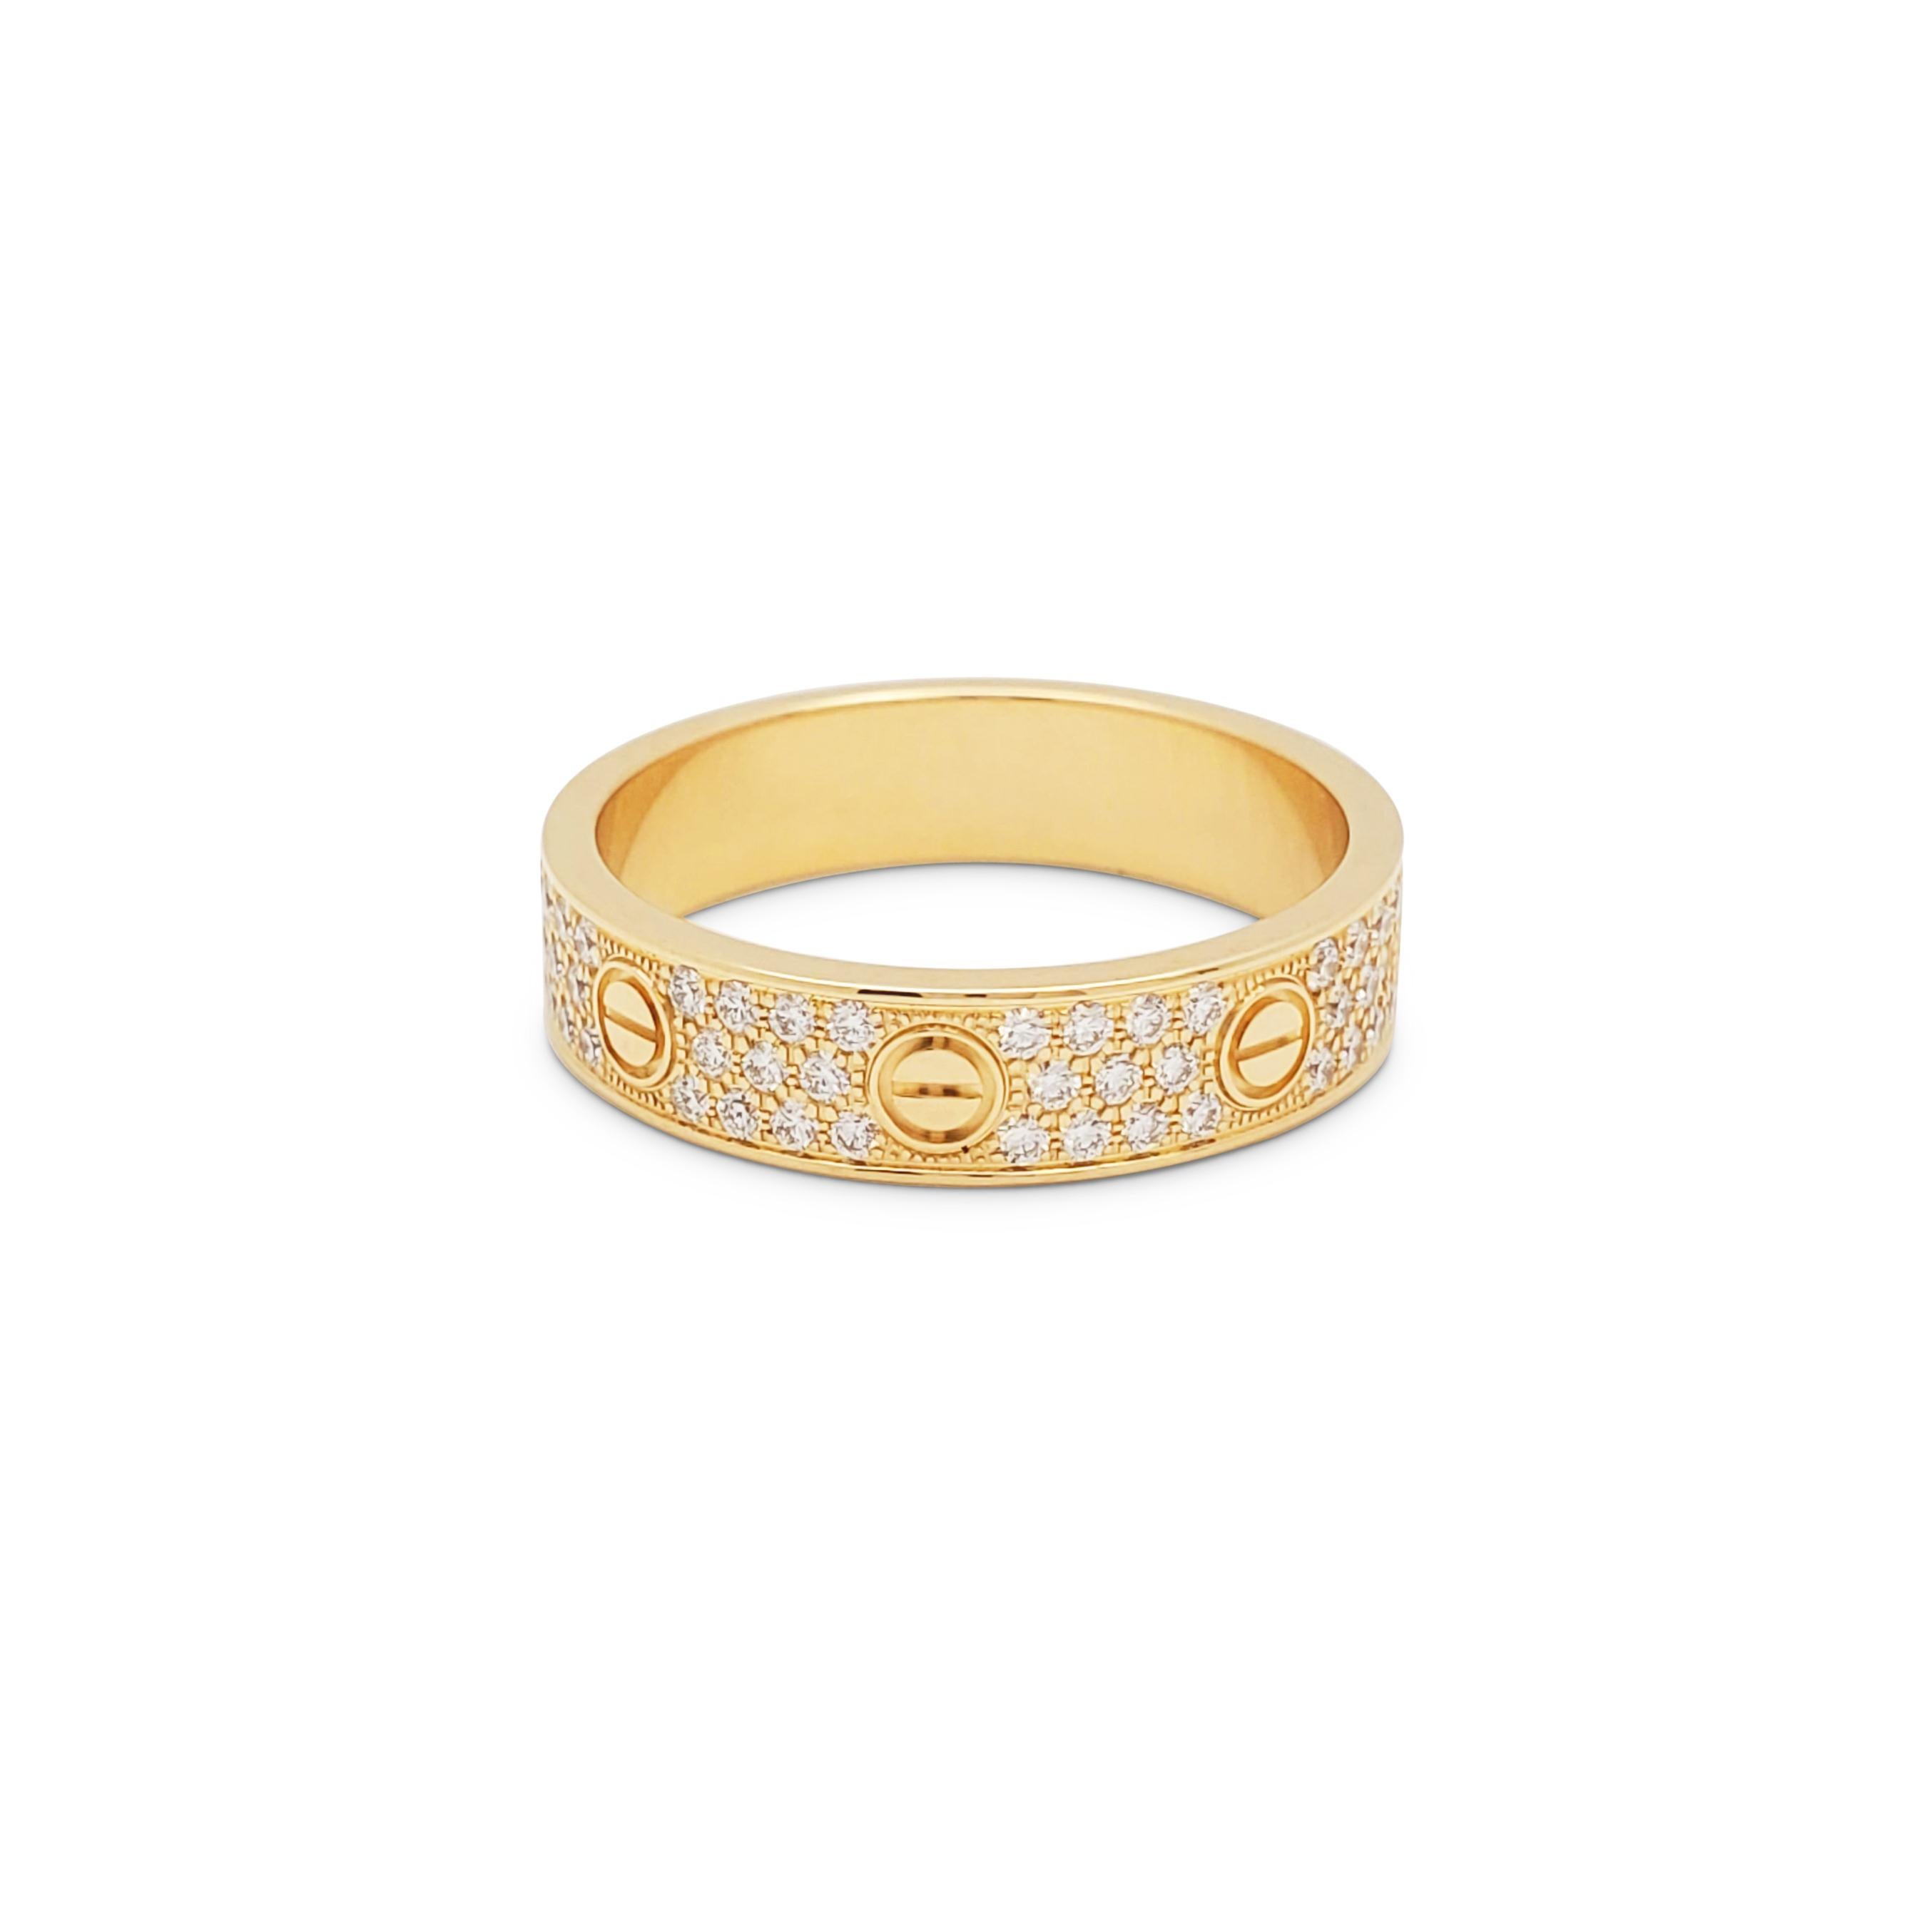 Authentic Cartier ‘Love’ Wedding Band crafted in 18 karat yellow gold and set with three rows of glittering pave set round brilliant diamonds weighing an estimated 0.31 carats.  Size 55 (US 7 1/4).  Signed Cartier, 55, Au750, with serial number and